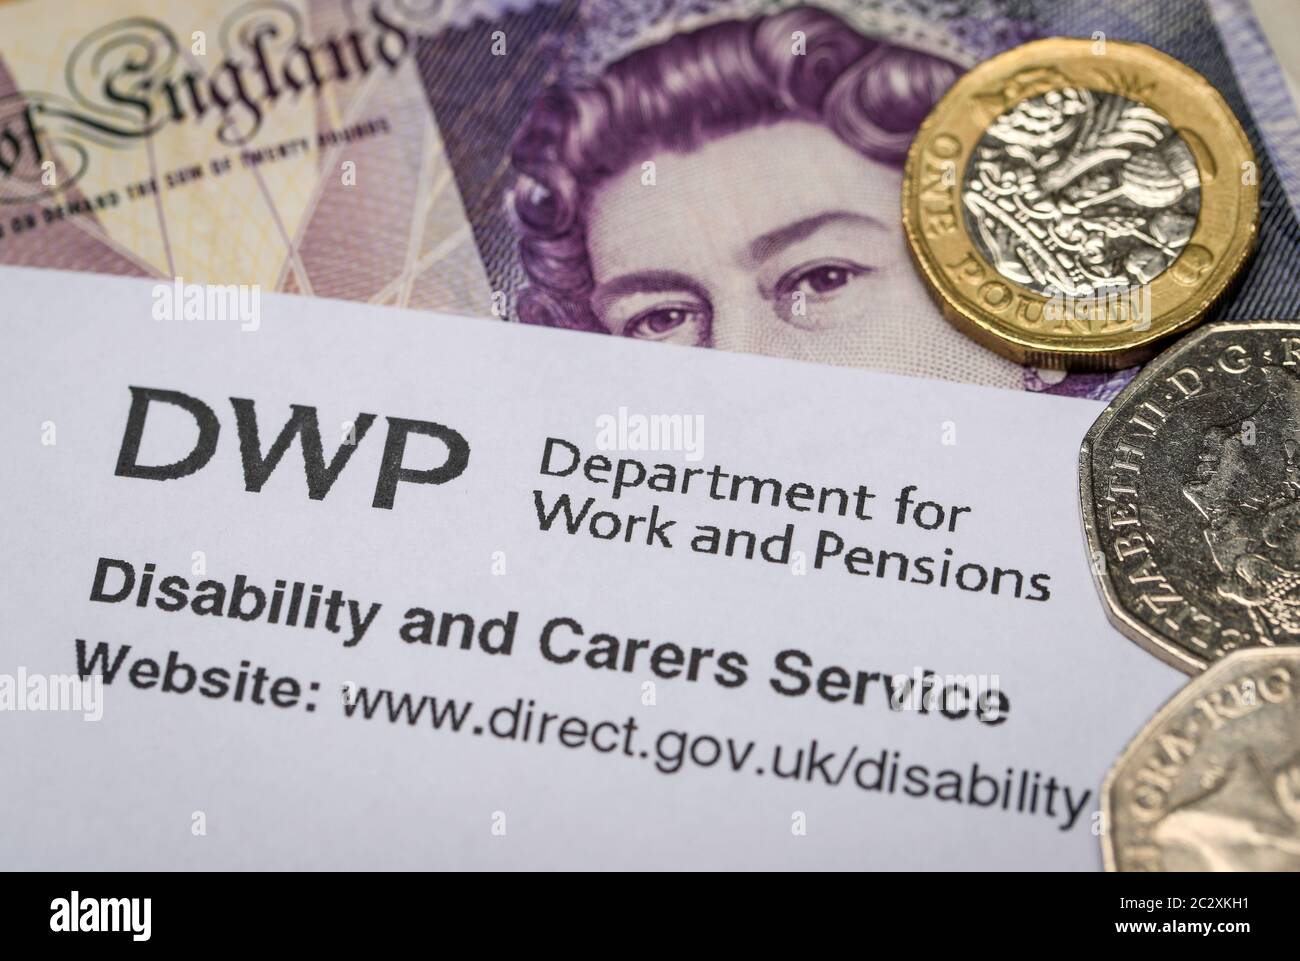 DWP Department for work and pensions letter with UK currency Stock Photo